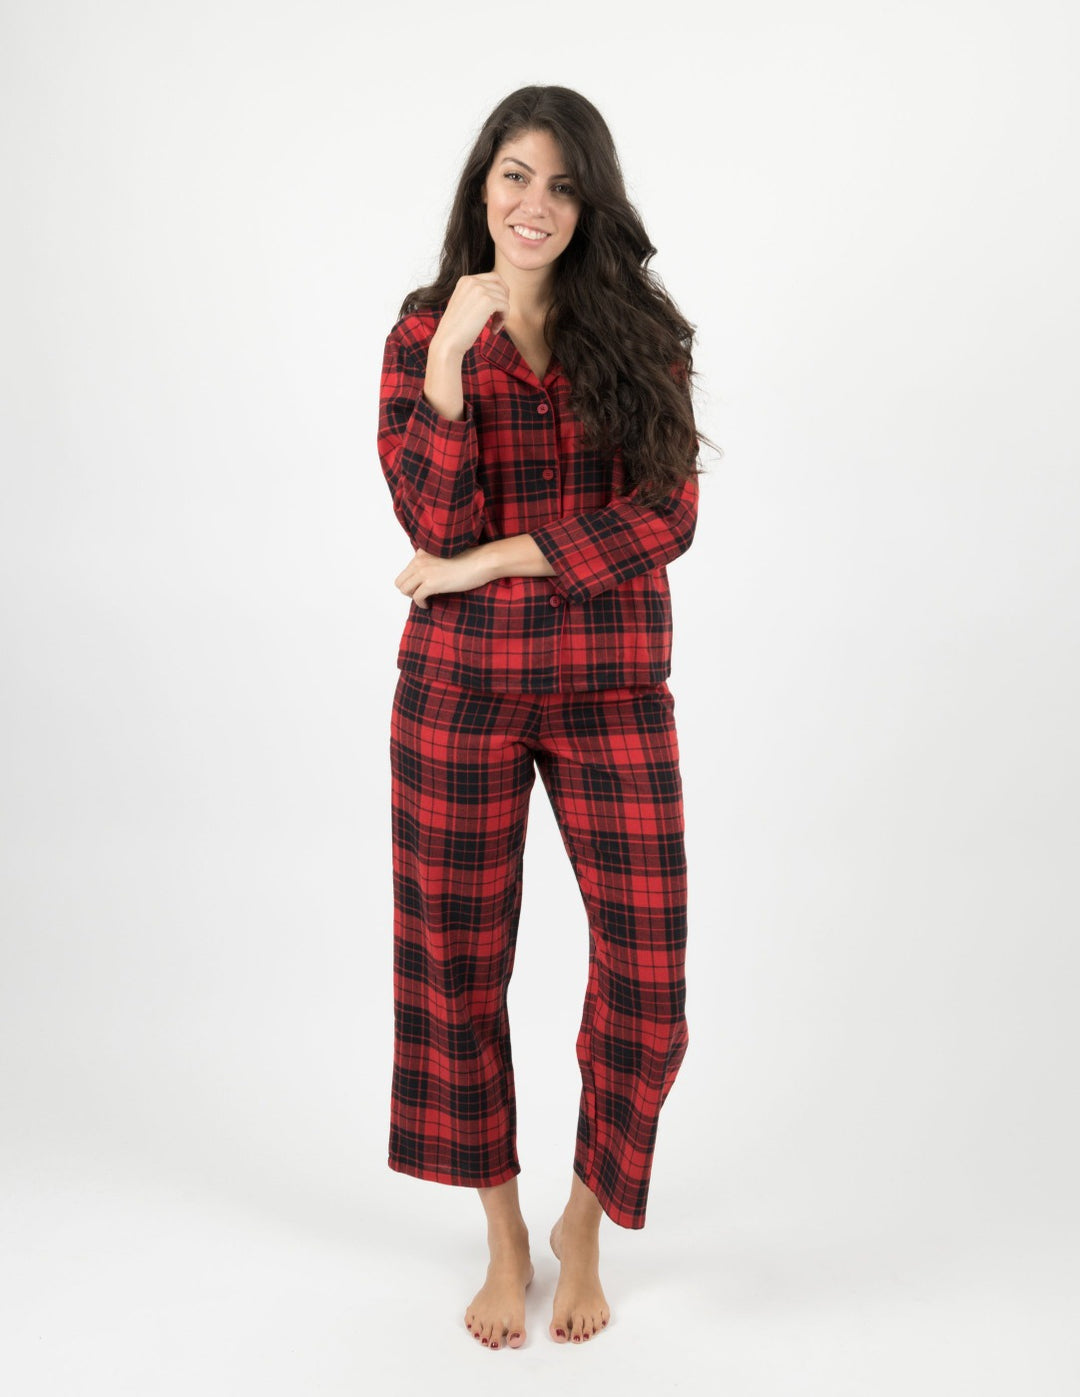 red and black flannel women's pajamas